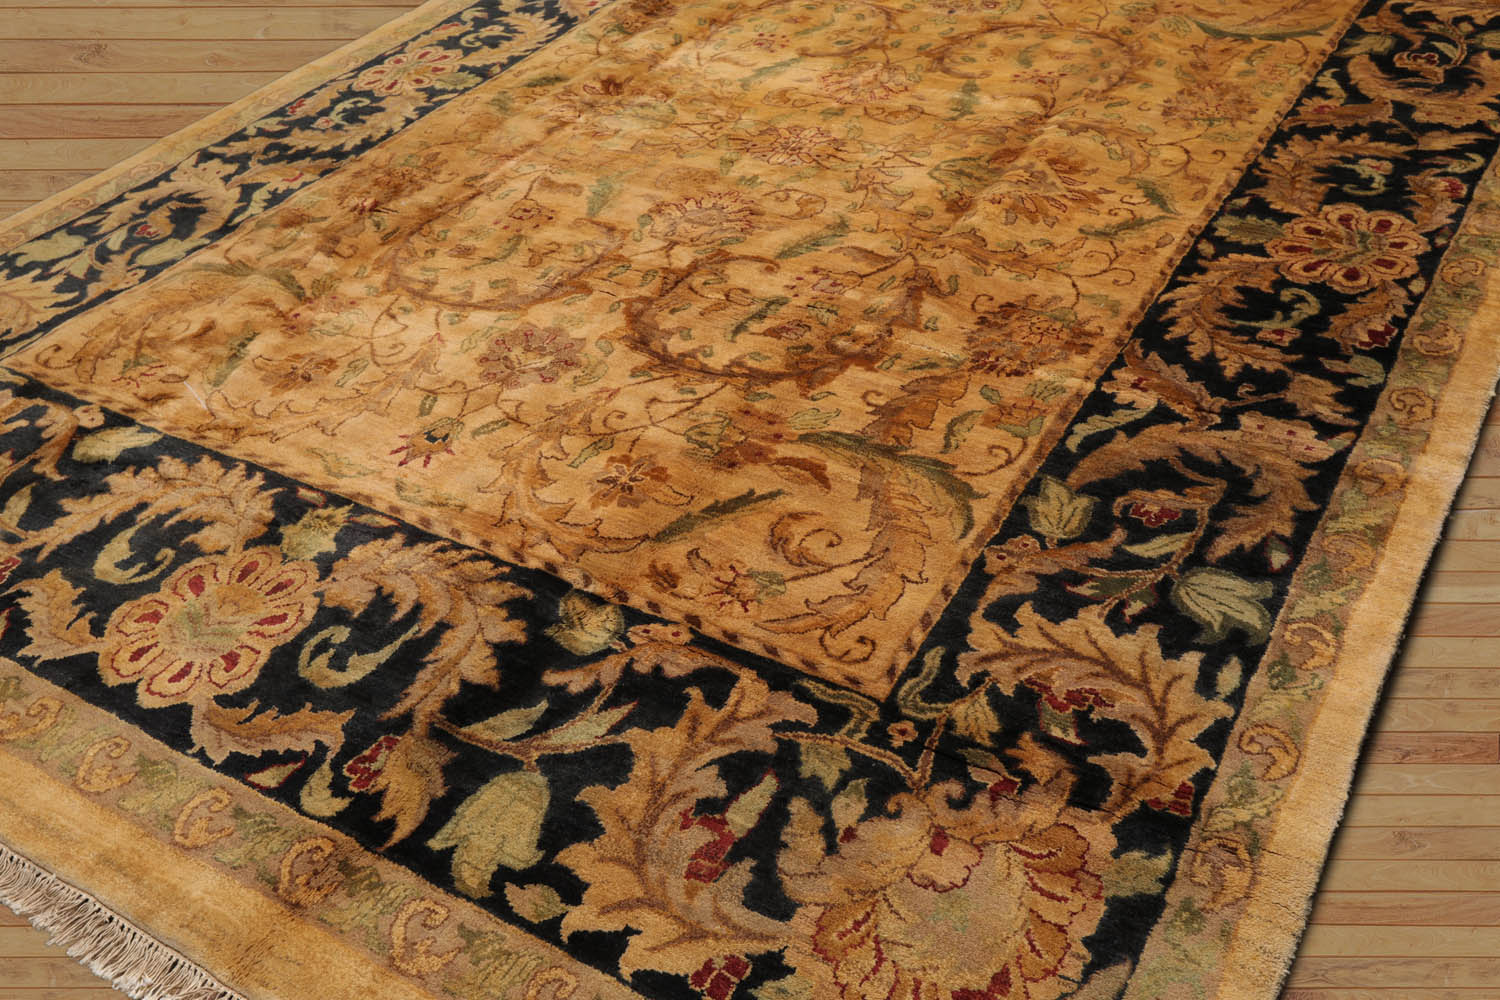 Anniqua 9x12 Hand Knotted 100% Wool Agra Traditional Oriental Area Rug Light Gold, Charcoal Color